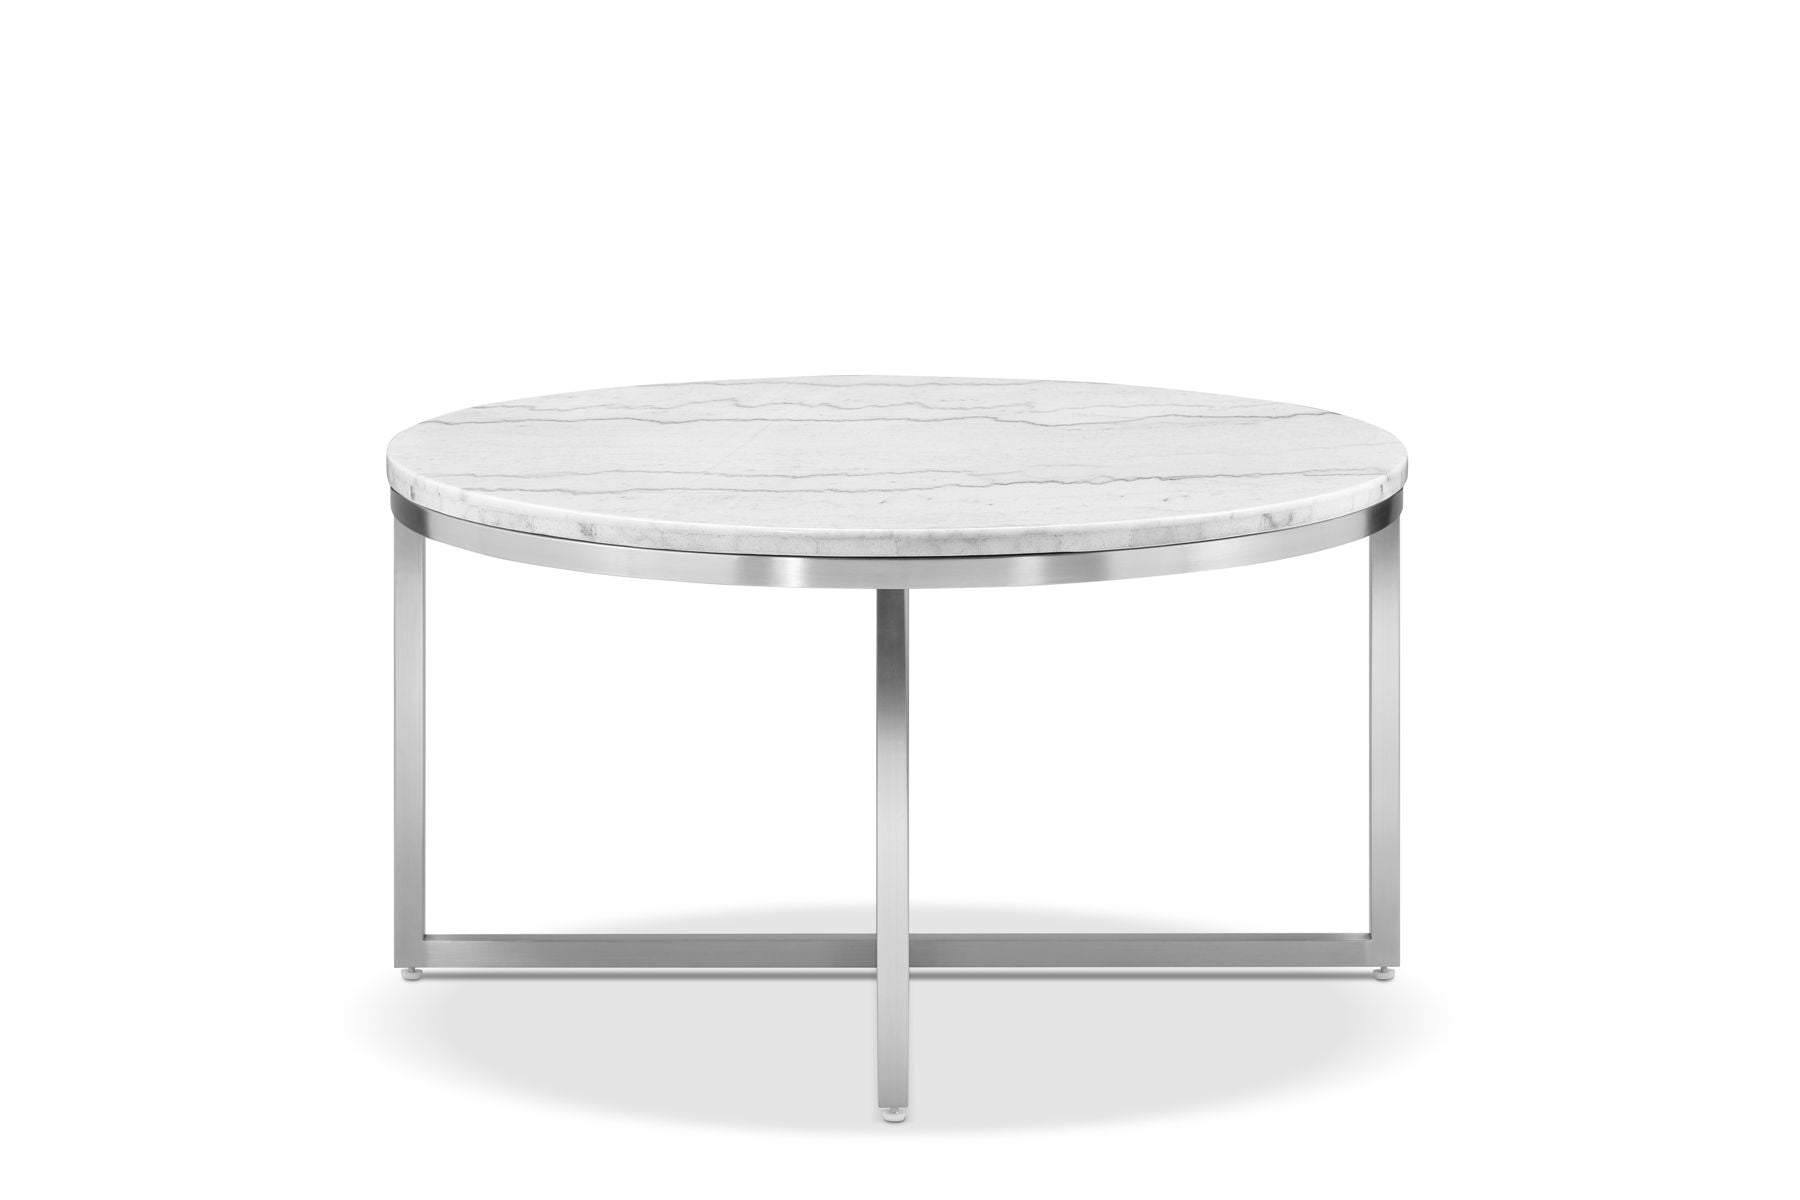 Esme - Round Cocktail Table - White Marble And Brushed Nickel